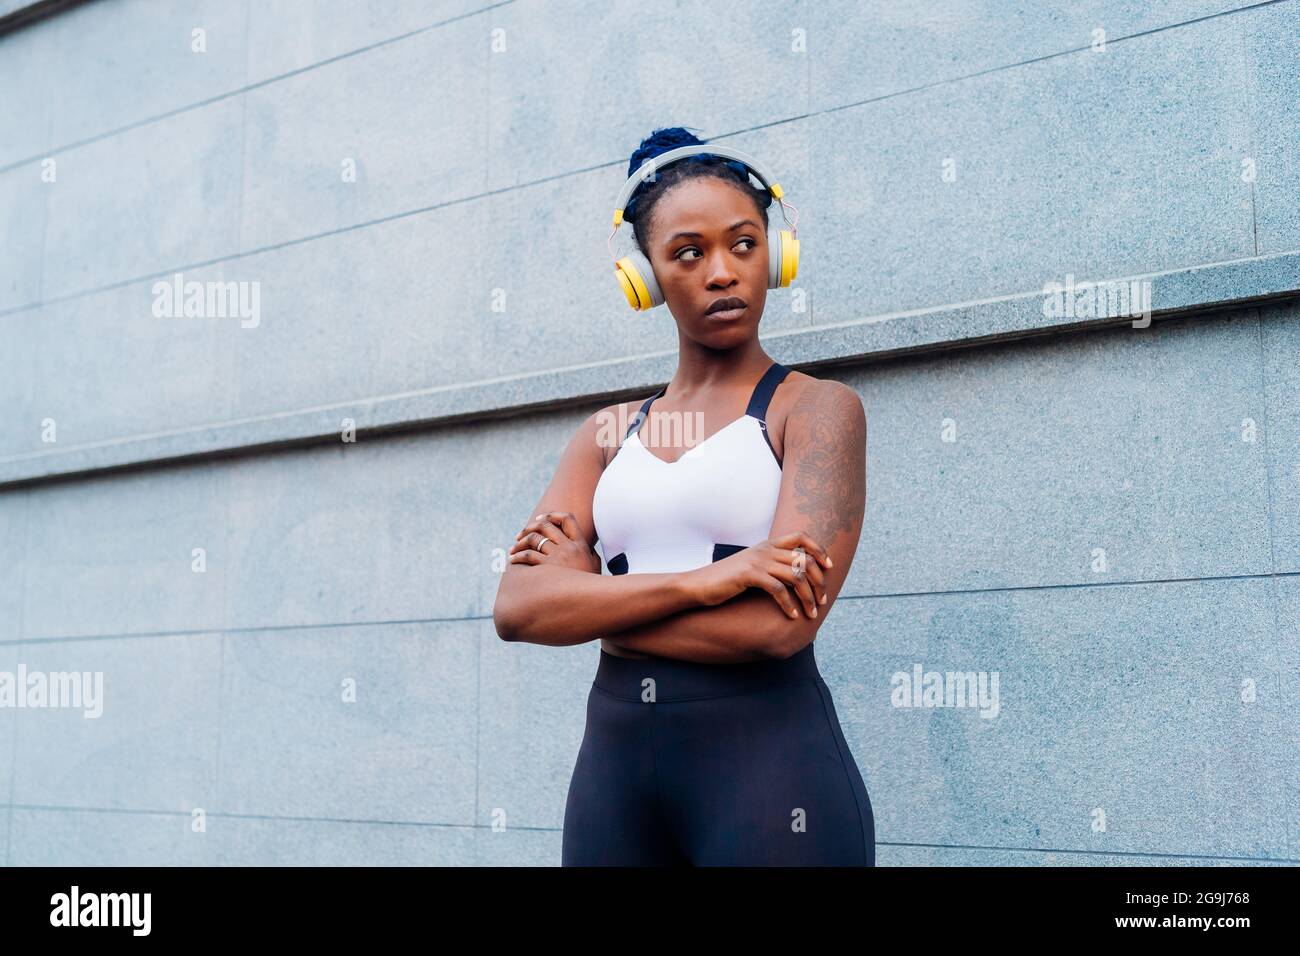 Italy, Milan, Portrait of woman in sports bra and headphones in city Stock Photo